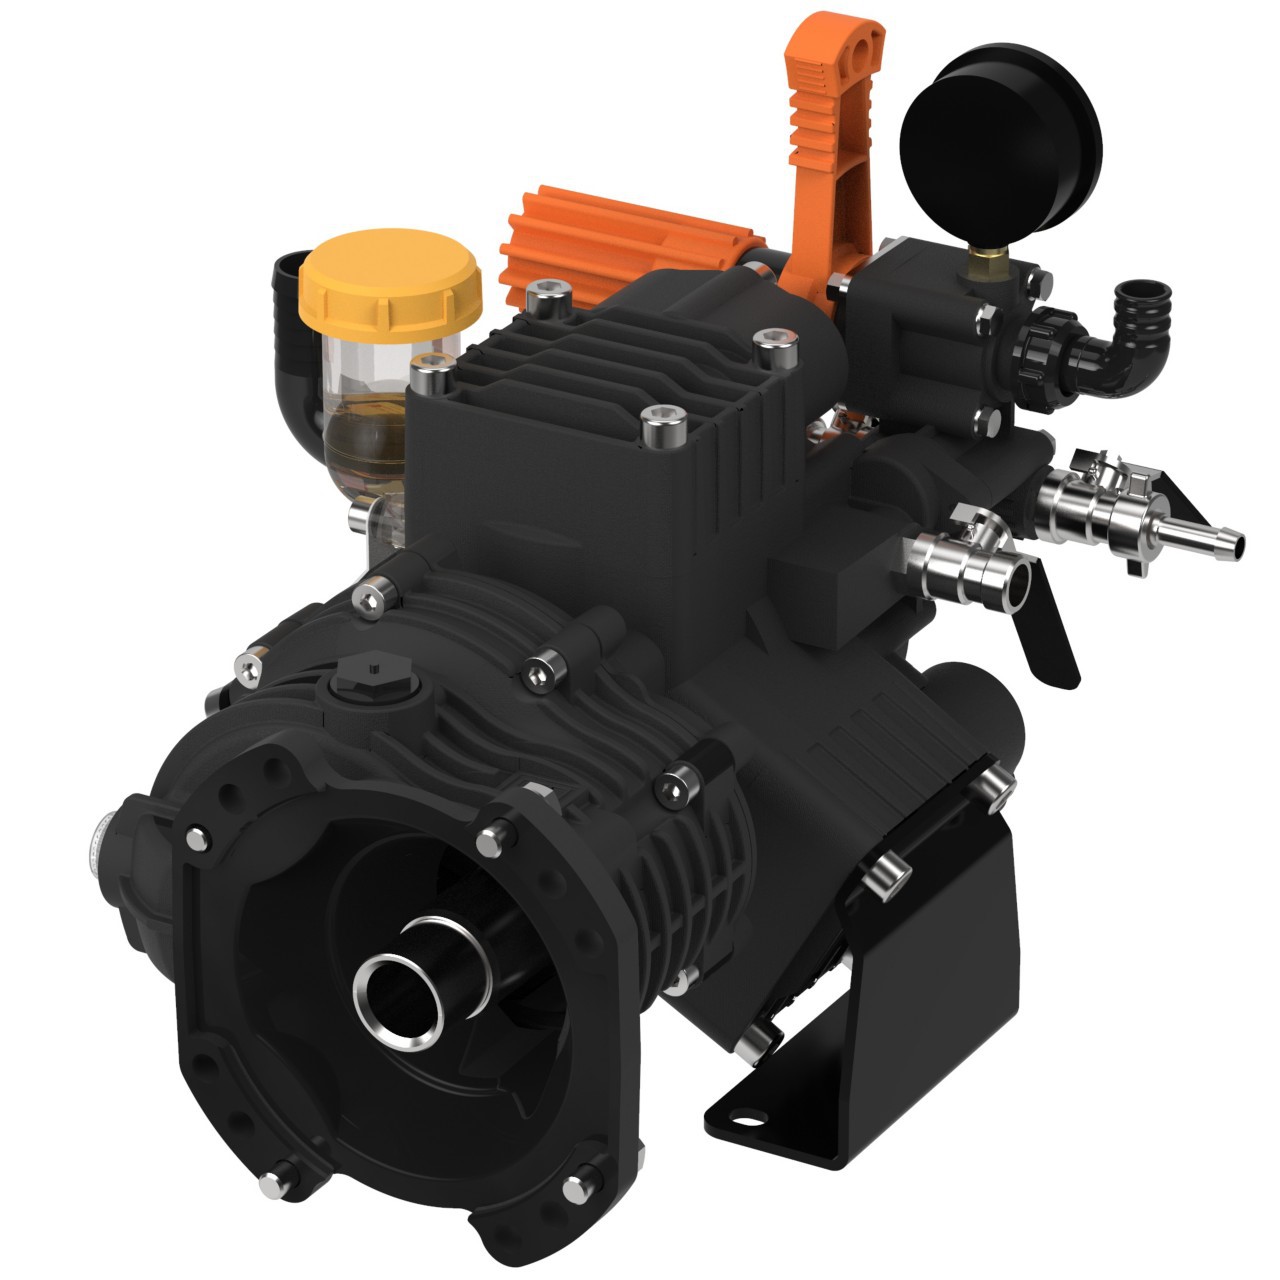 Picture of Diaphragm Pump, Medium Pressure, Aluminum Body, with Gearbox & Pressure Control, 13.5 GPM, 580 PSI, 3450 RPM, 1" Hollow Shaft, 1-3/8" Inlet, 3/4" Outlet, 5.5 HP